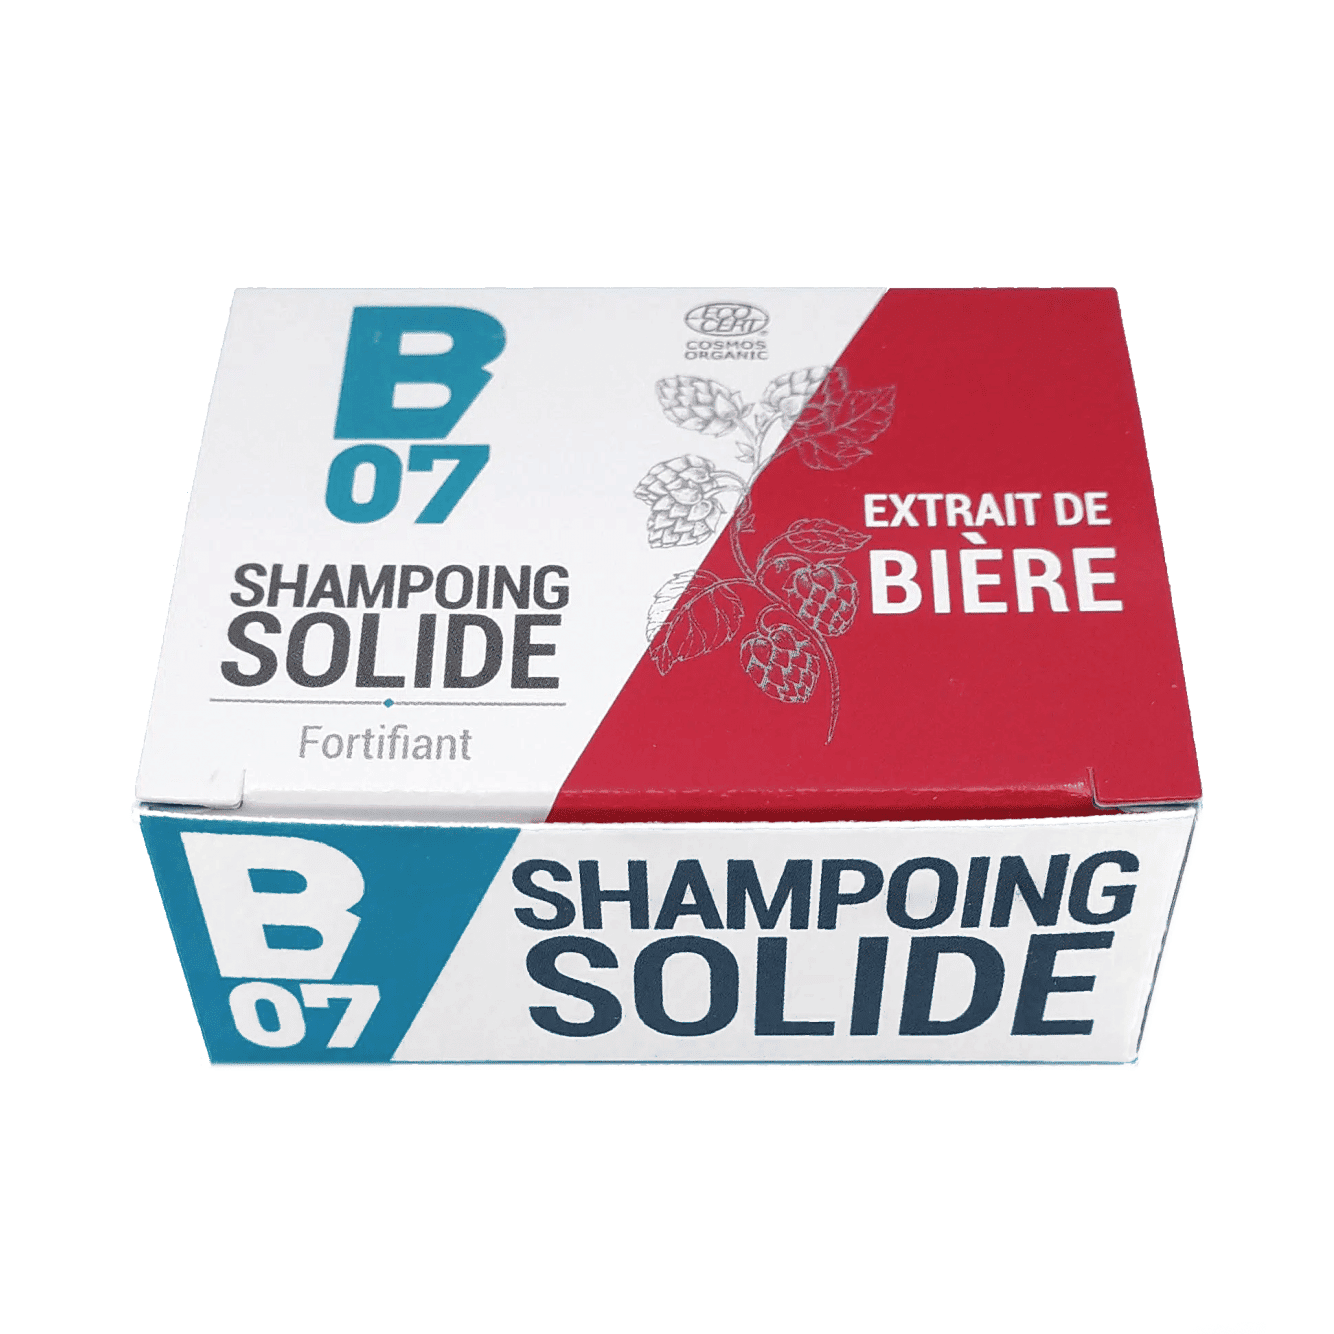 Shampoing solide B07